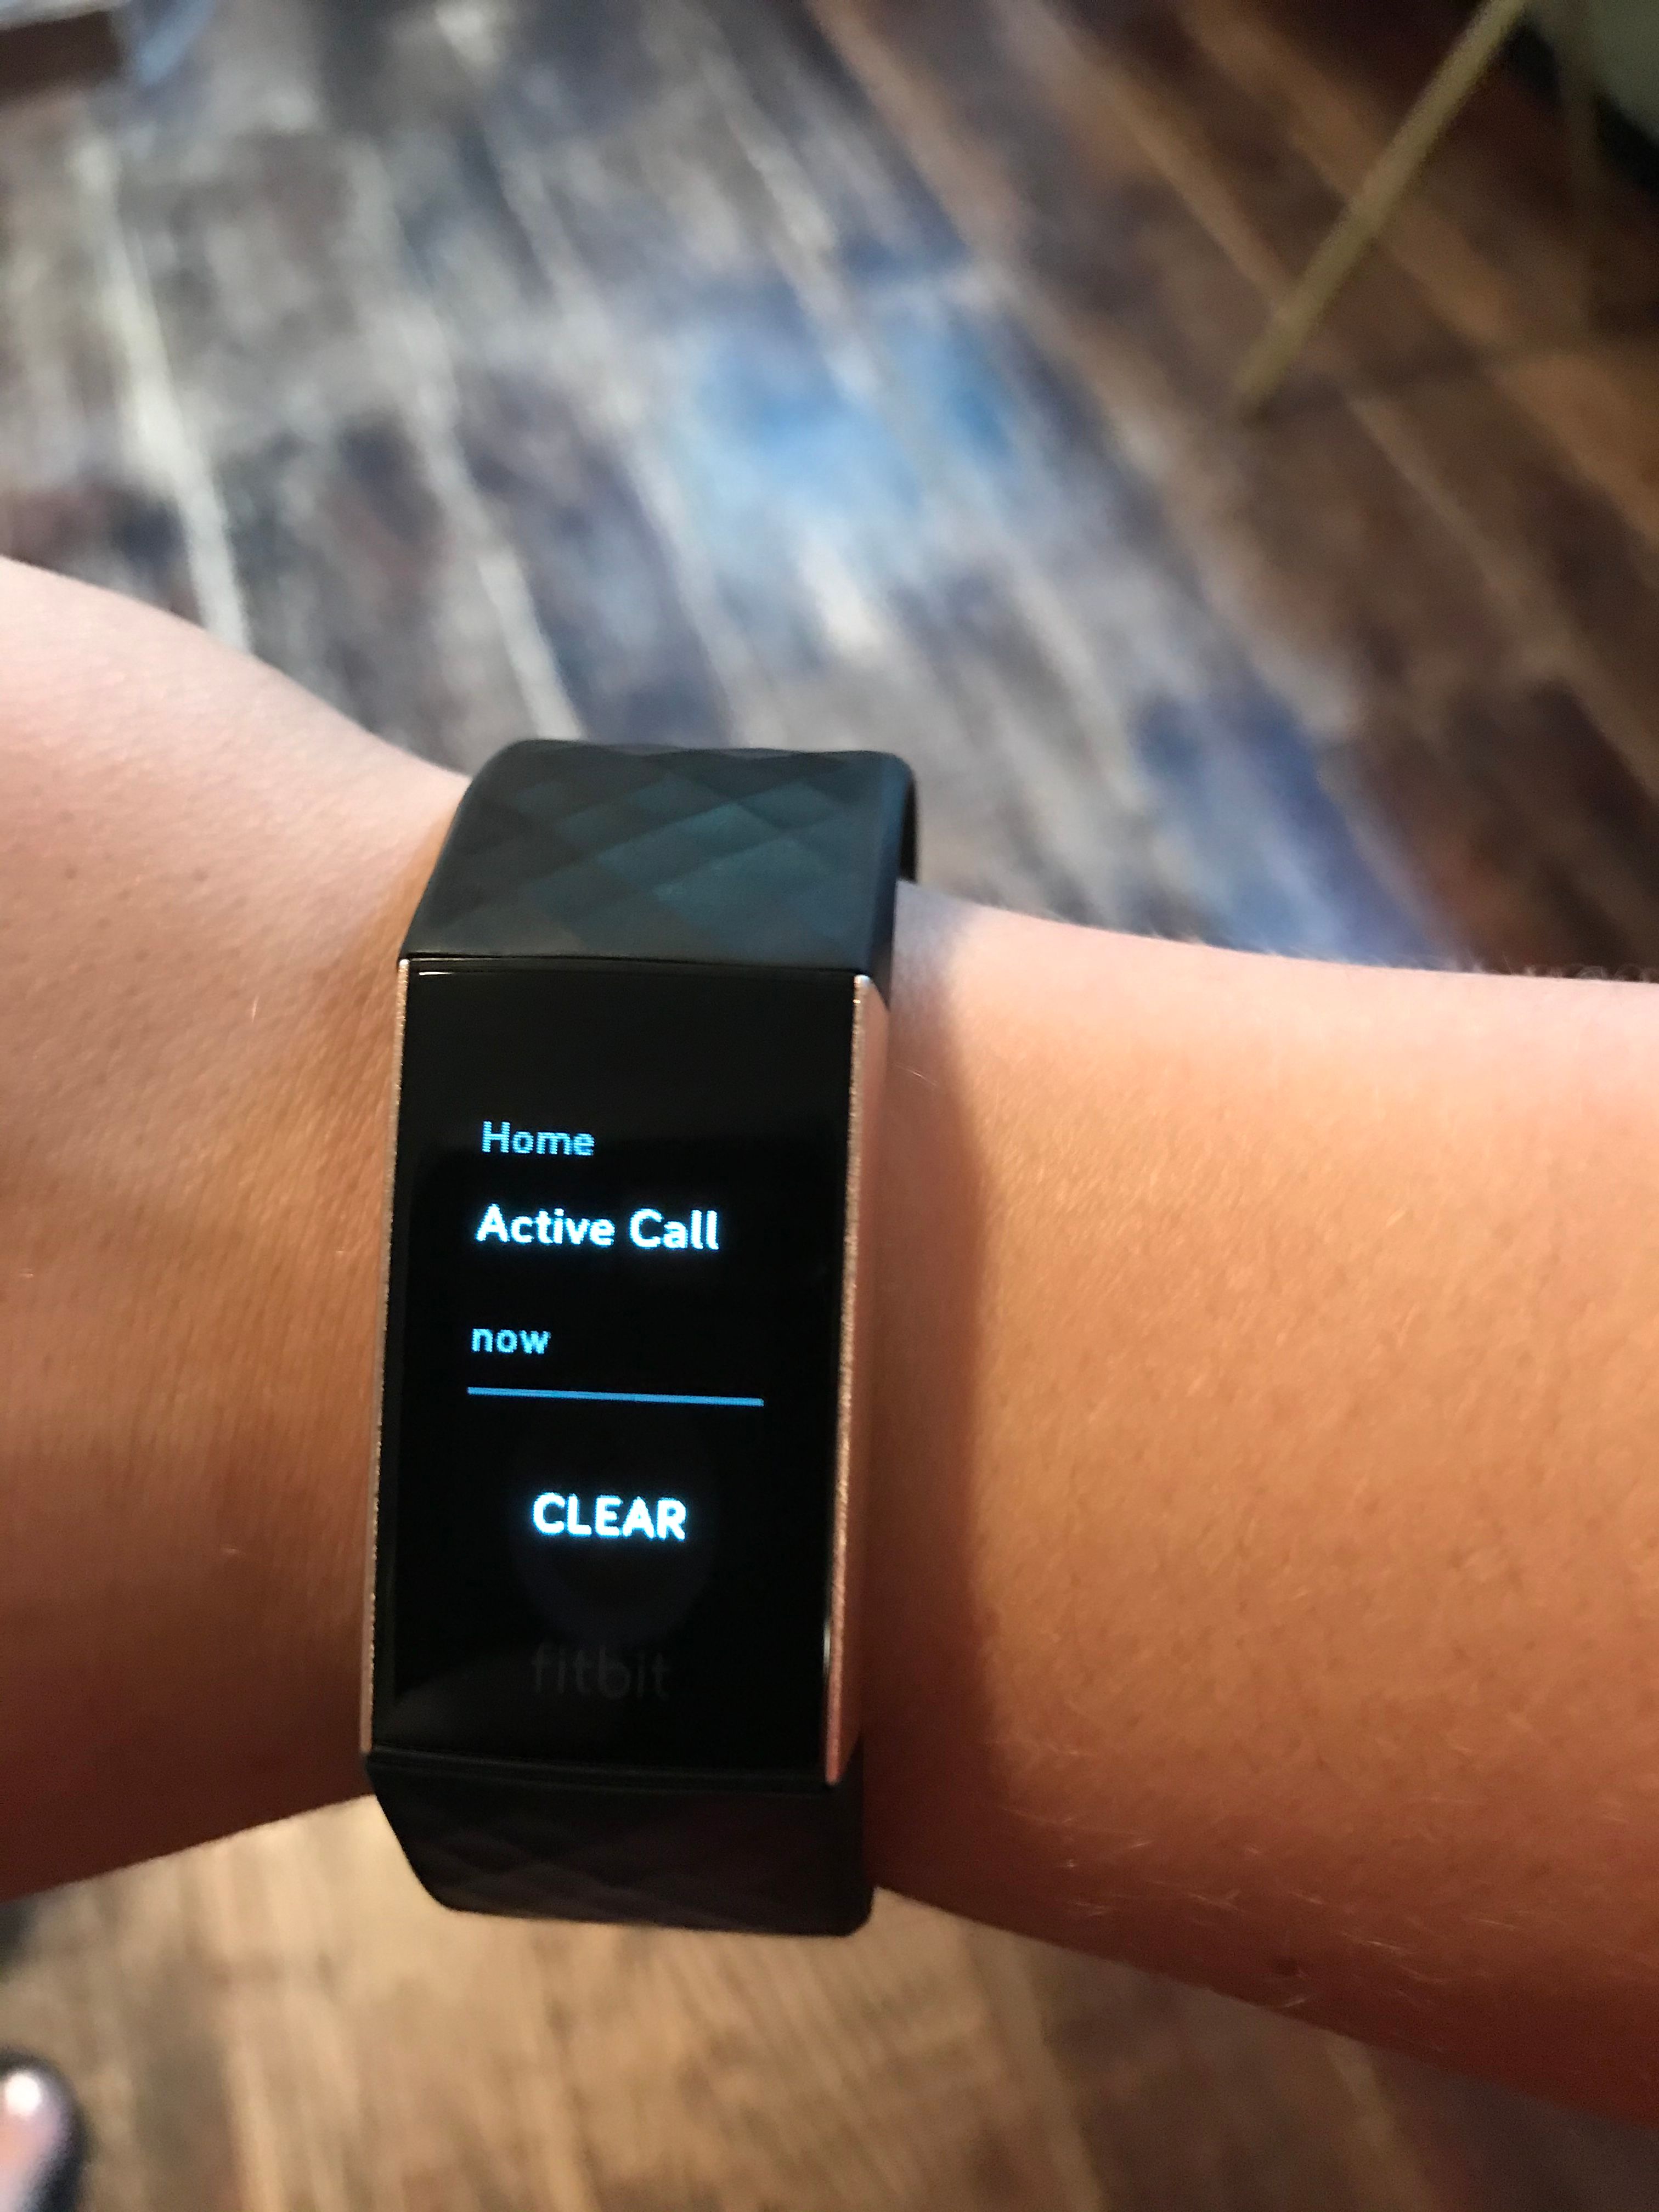 fitbit charge 3 always on screen